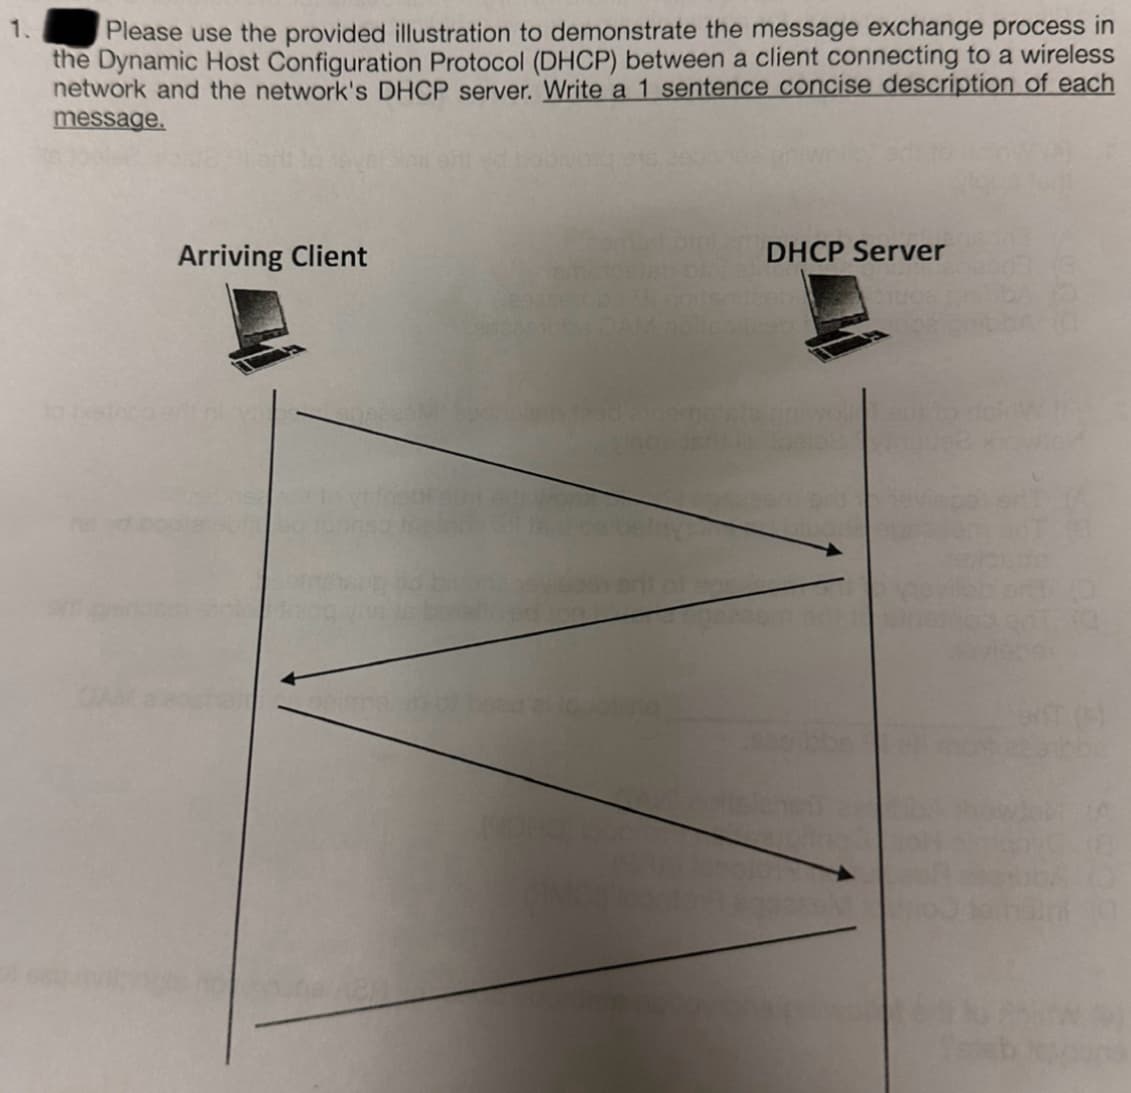 1.
Please use the provided illustration to demonstrate the message exchange process in
the Dynamic Host Configuration Protocol (DHCP) between a client connecting to a wireless
network and the network's DHCP server. Write a 1 sentence concise description of each
message.
to jethco
Arriving Client
DHCP Server